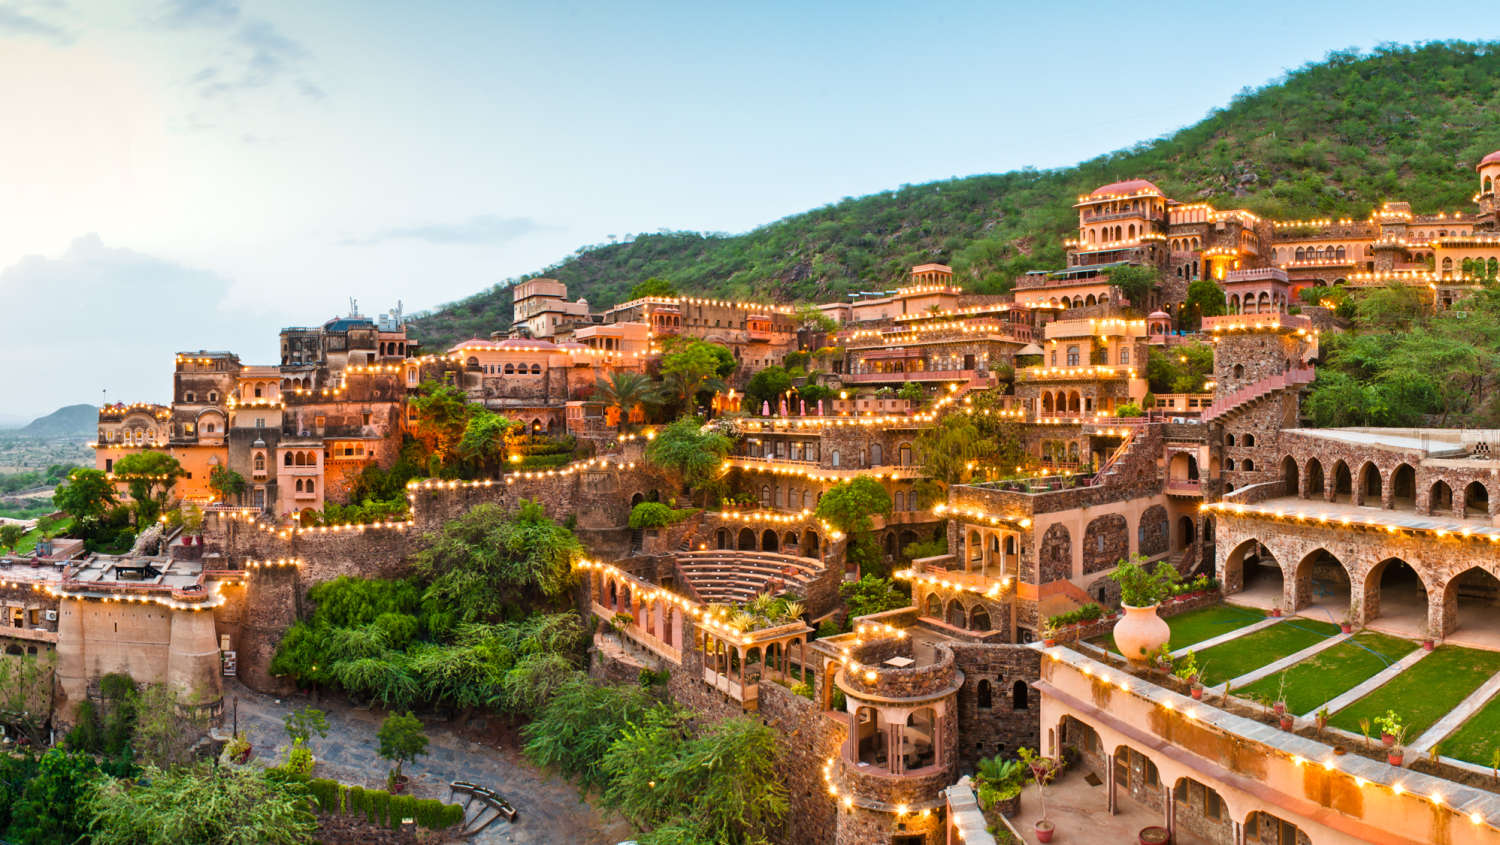 one day short trip from delhi to neemrana fort palace